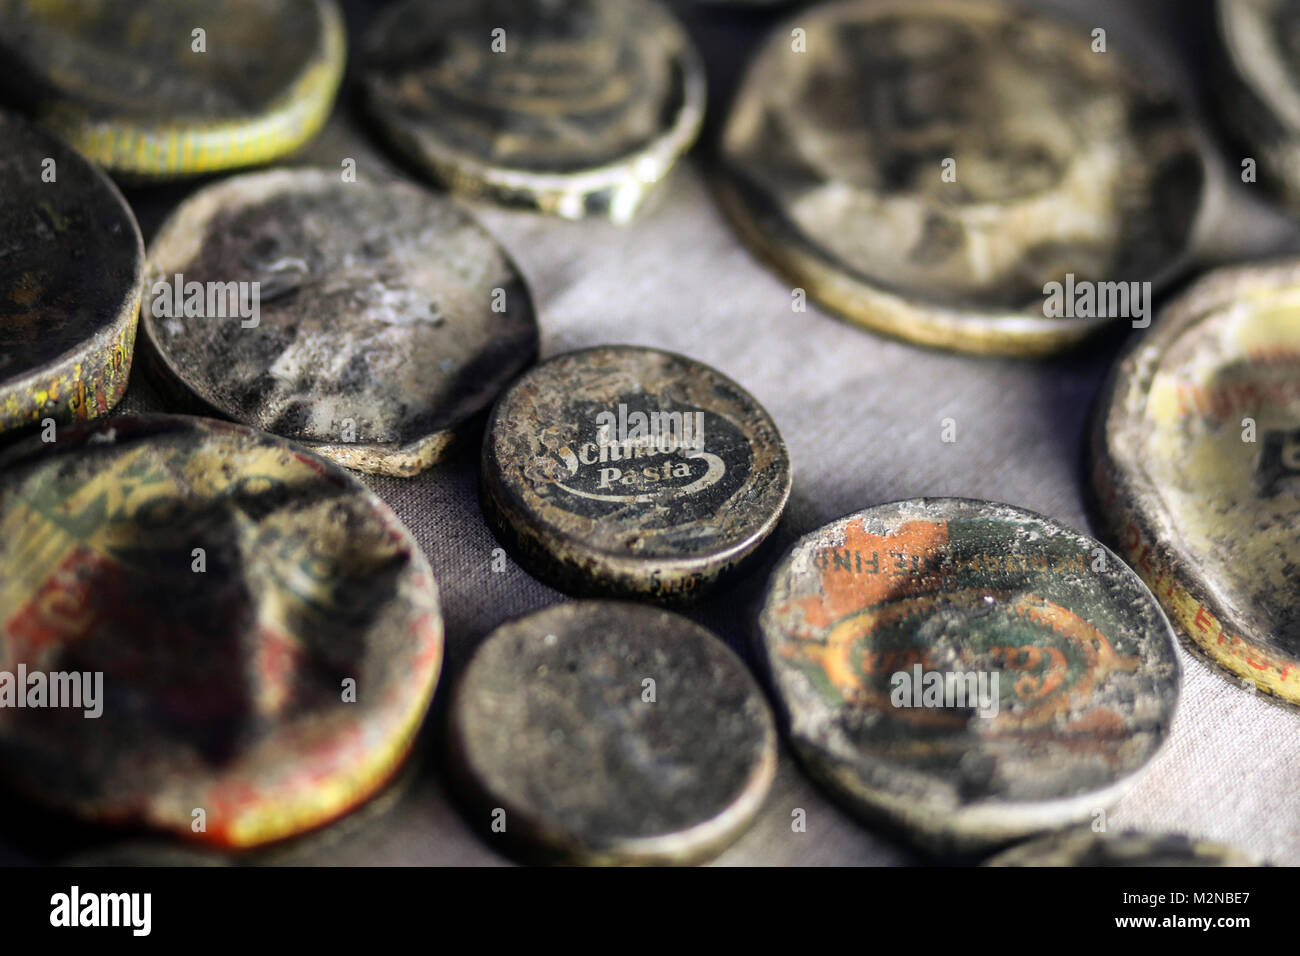 OSWIECIM, POLAND - JANUARY 26, 2016: The former German Nazi concentration and extermination camp Auschwitz . Shoe polish cans at the permanent Exhibit Stock Photo